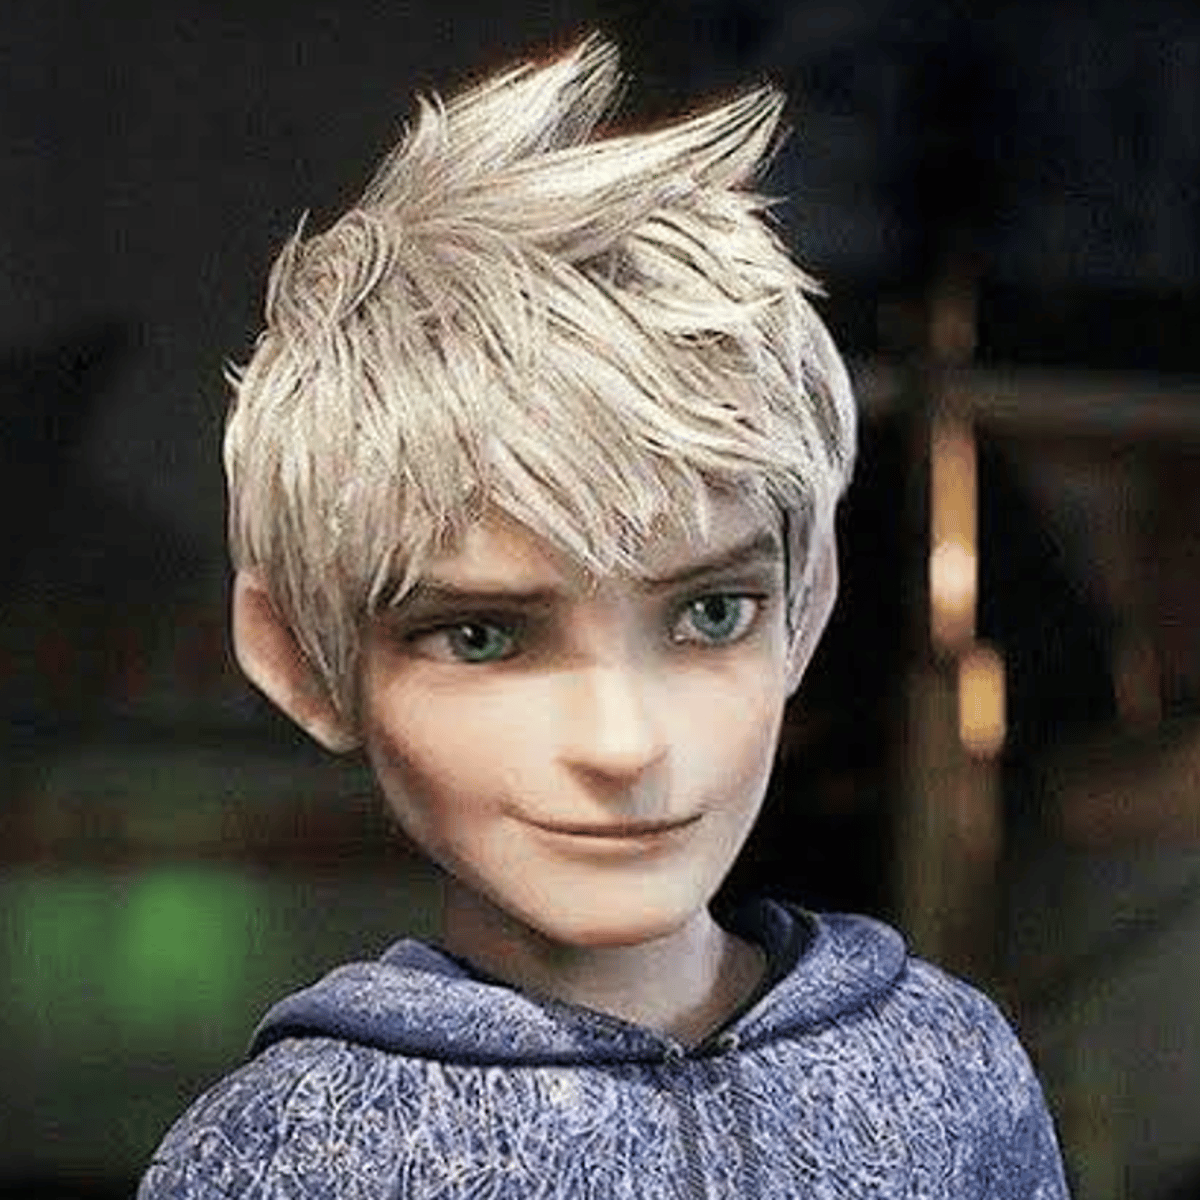 Jack Frost (ROTG)